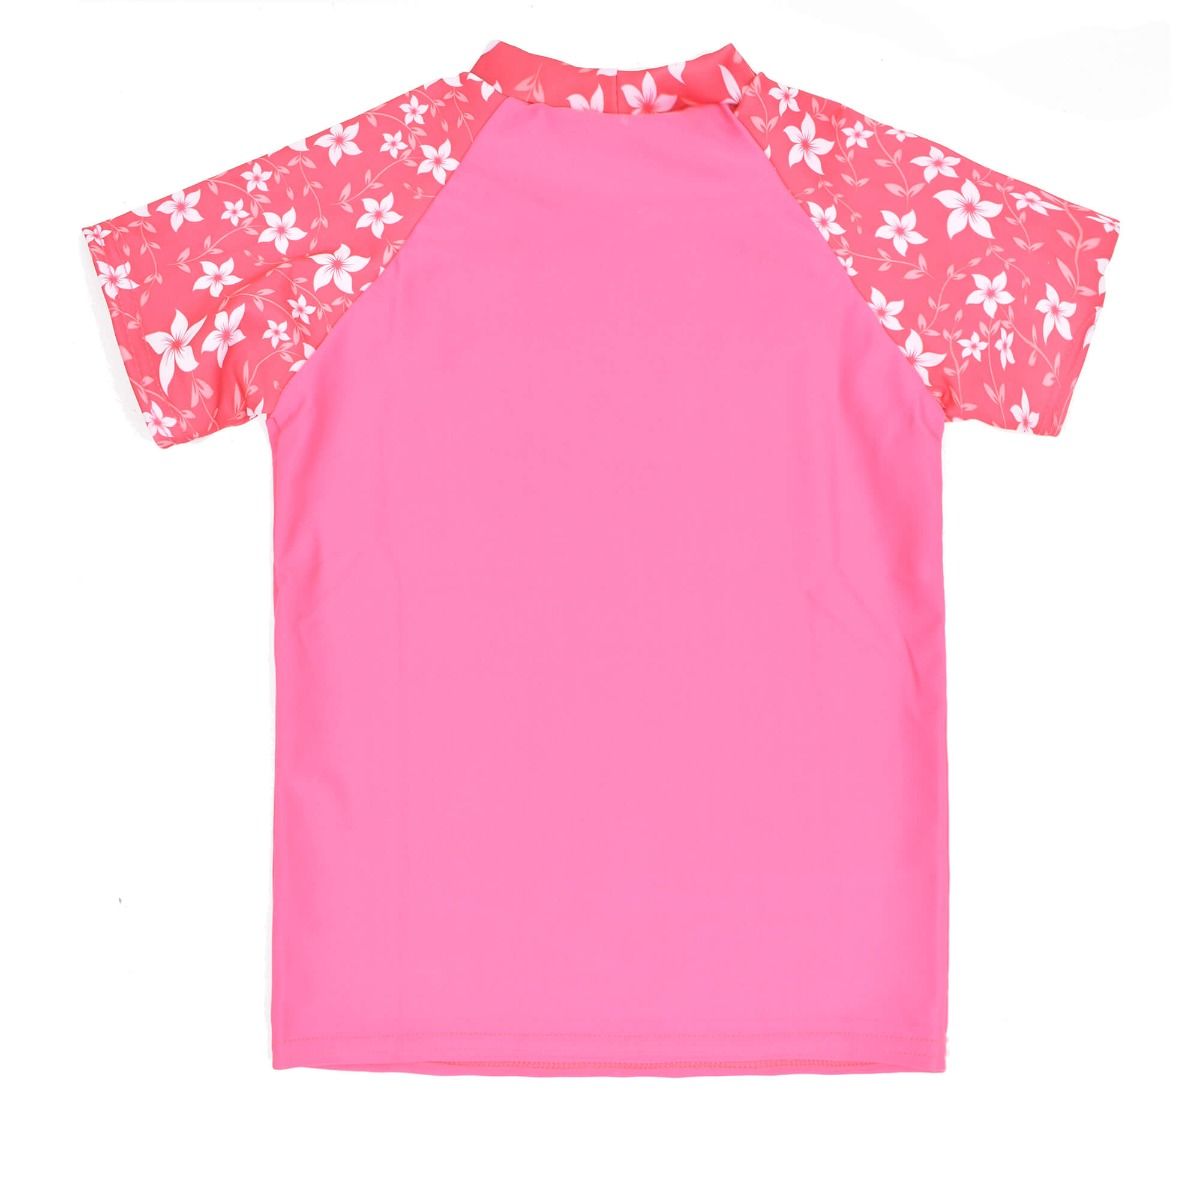 UV protective short sleeve rash top in pink, and floral print on sleeves. Back.